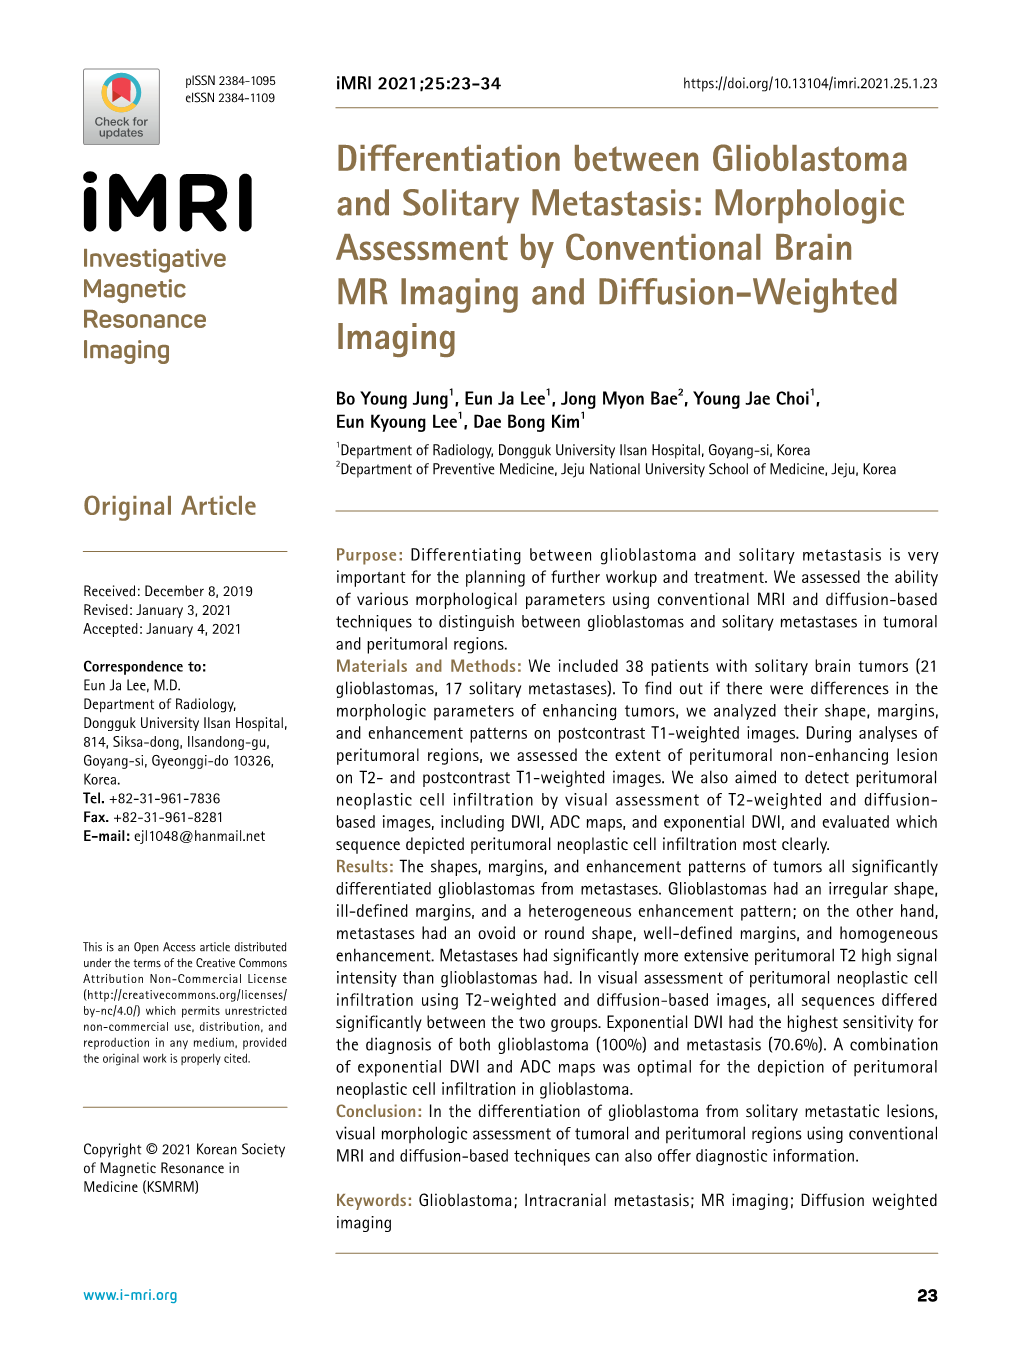 Differentiation Between Glioblastoma and Solitary Metastasis: Morphologic Assessment by Conventional Brain MR Imaging and Diffusion-Weighted Imaging